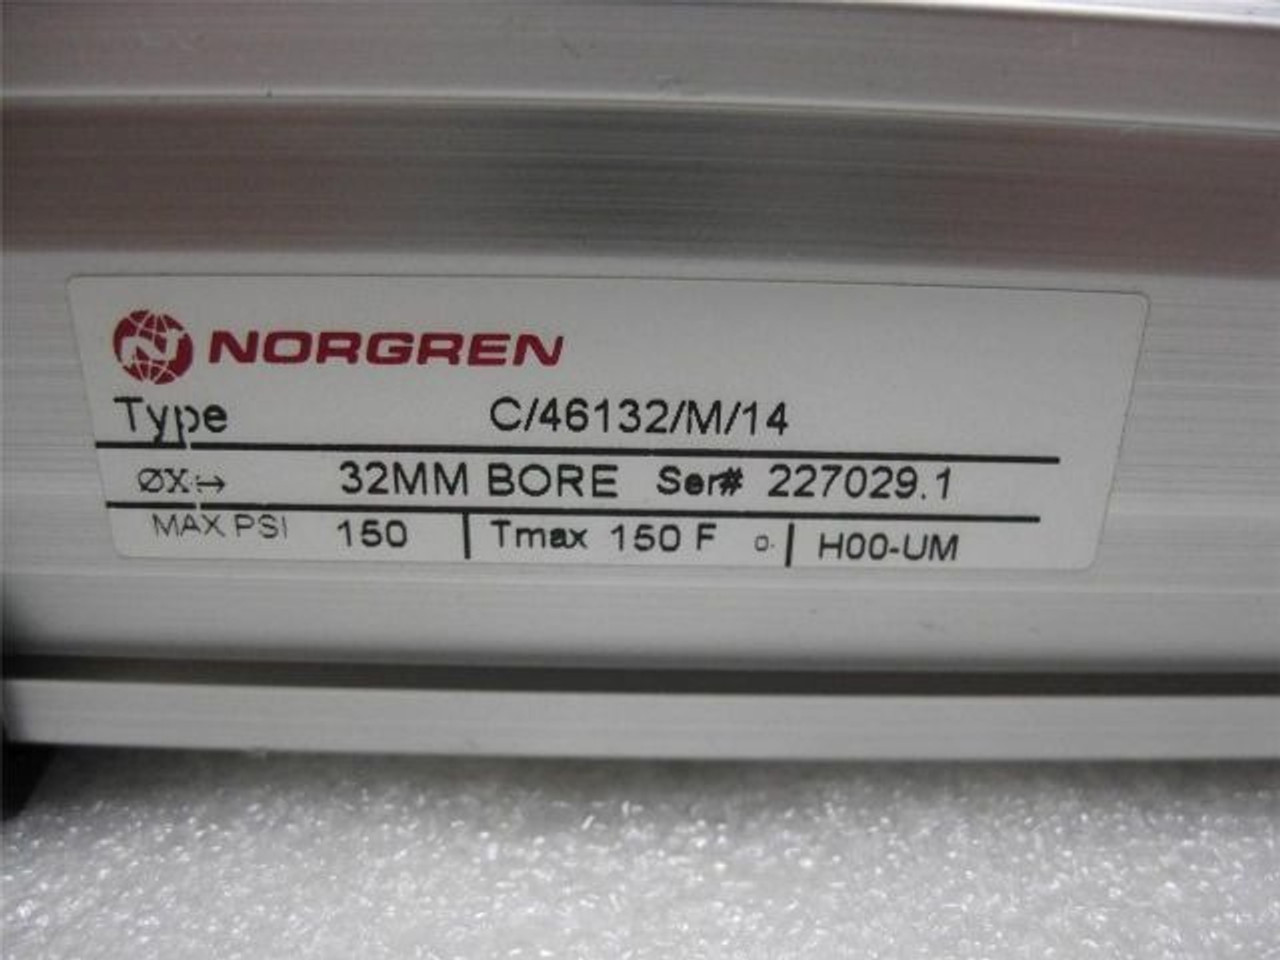 Norgren C/46132/M/14 Lintra Rodless Cylinder Magnetic Piston 32mm Bore 355mm Stroke